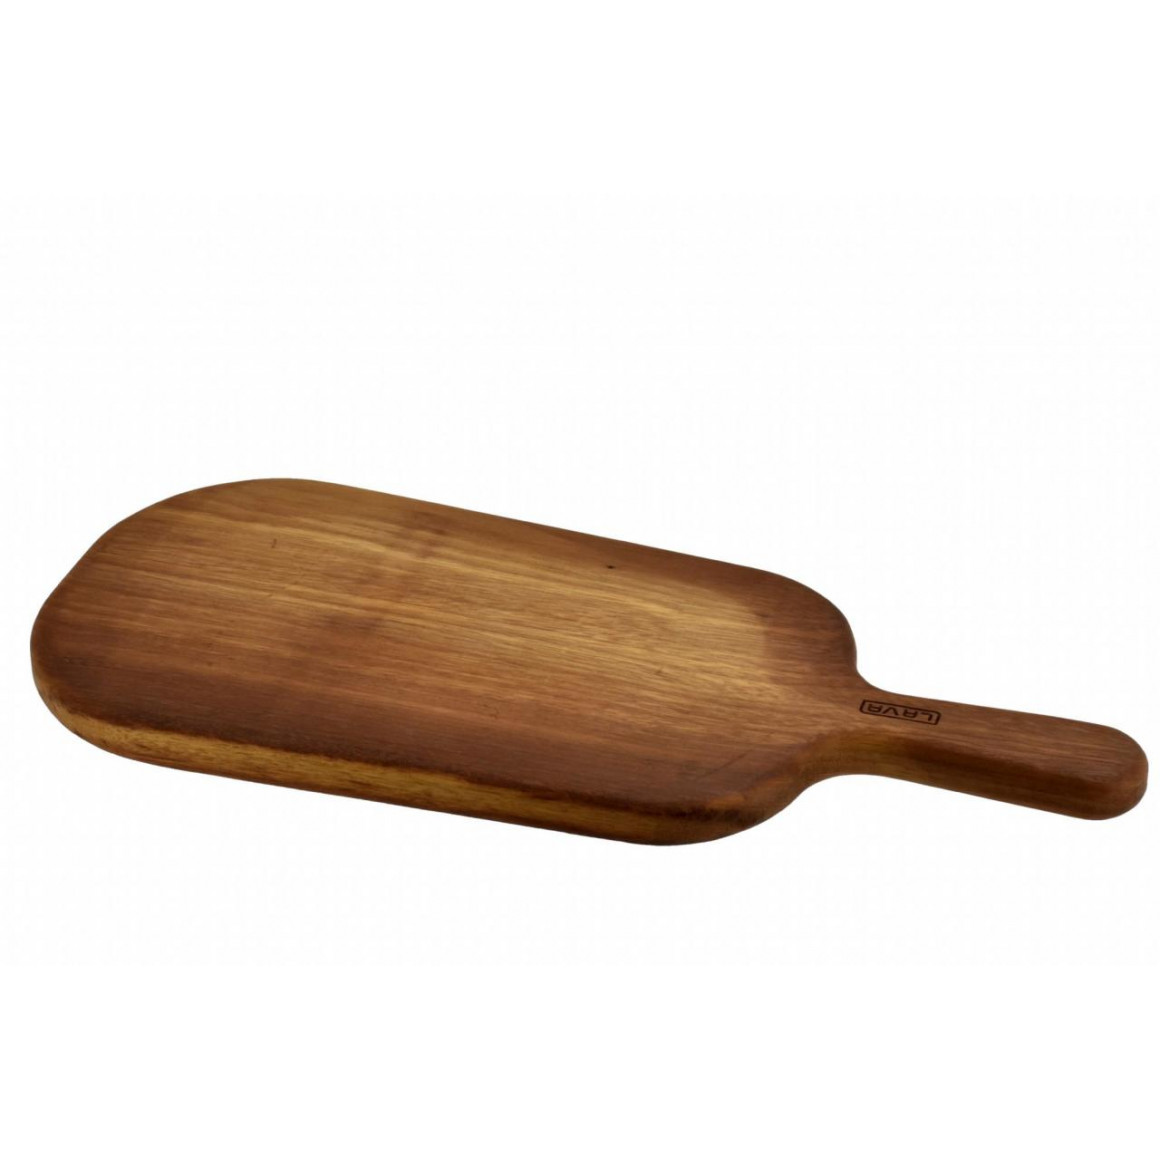 WOODEN SERVICE AND CUTTING BOARD